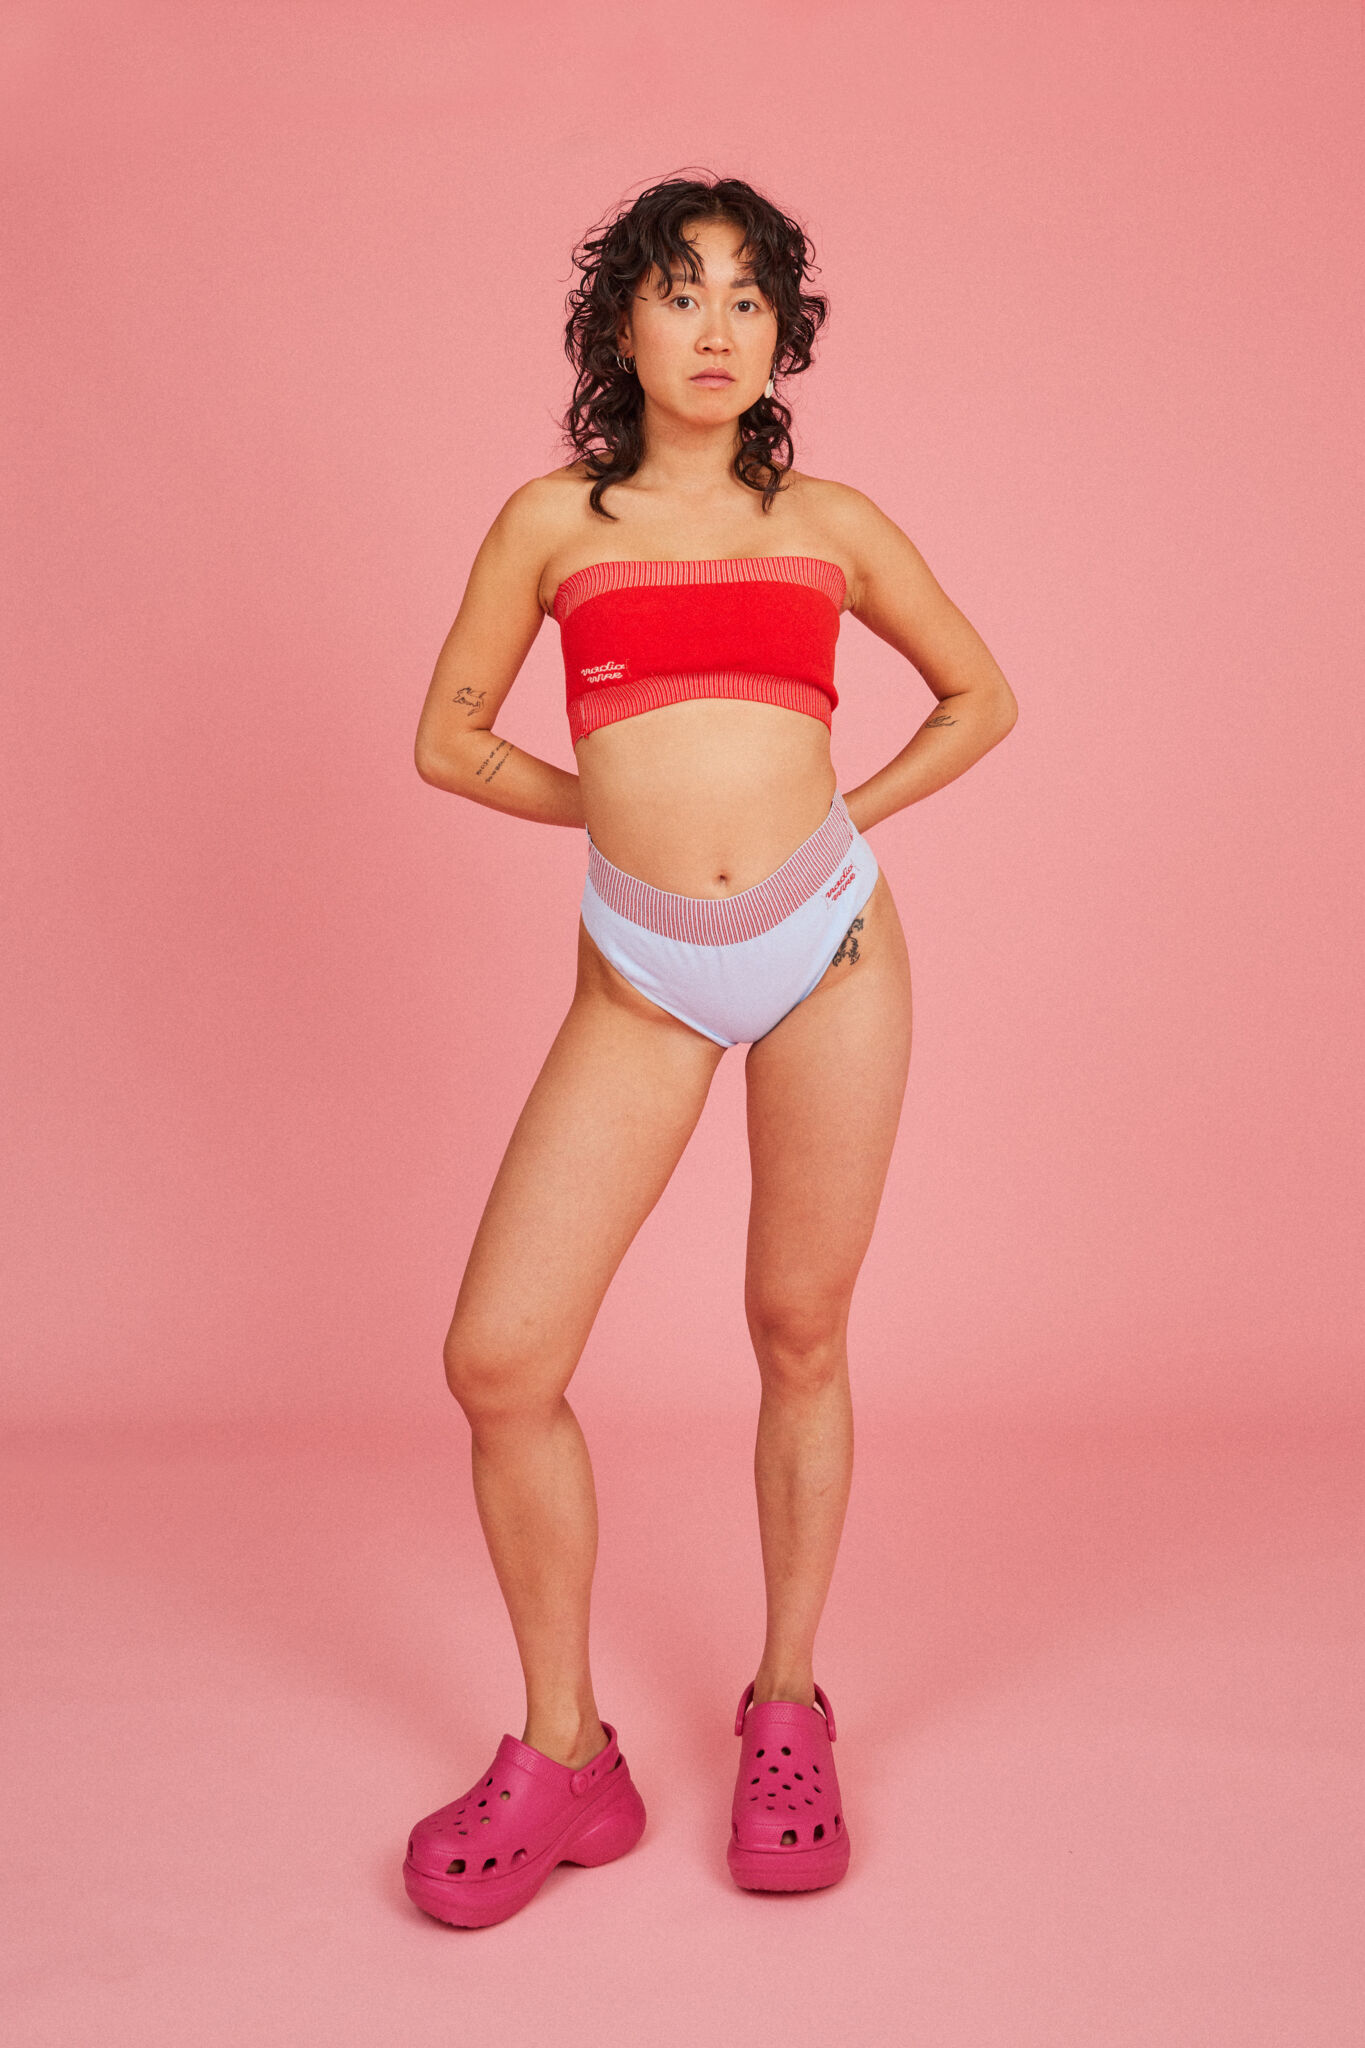 Loveable Loop shot by Amelia Lourie. Spring Bloomer Top and Panty. Tube top and high-waist panties. Can also be used as swimwear.